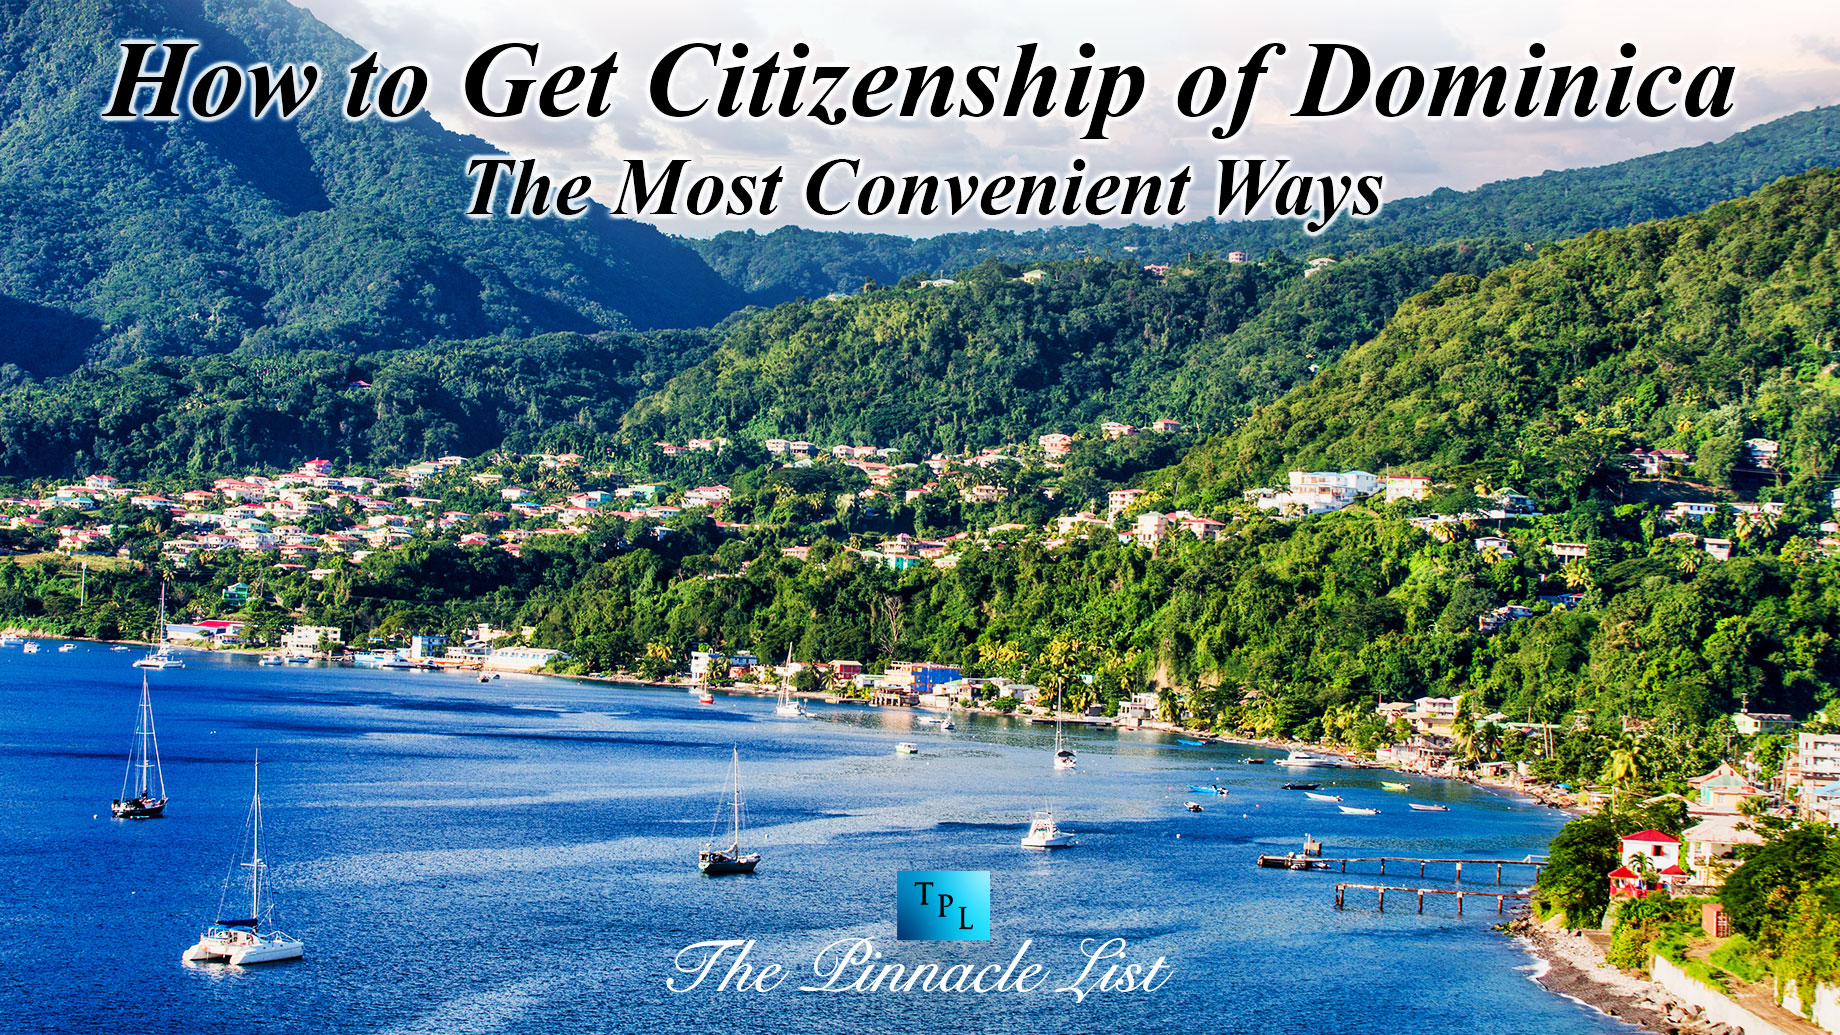 How to Get Citizenship of Dominica: The Most Convenient Ways